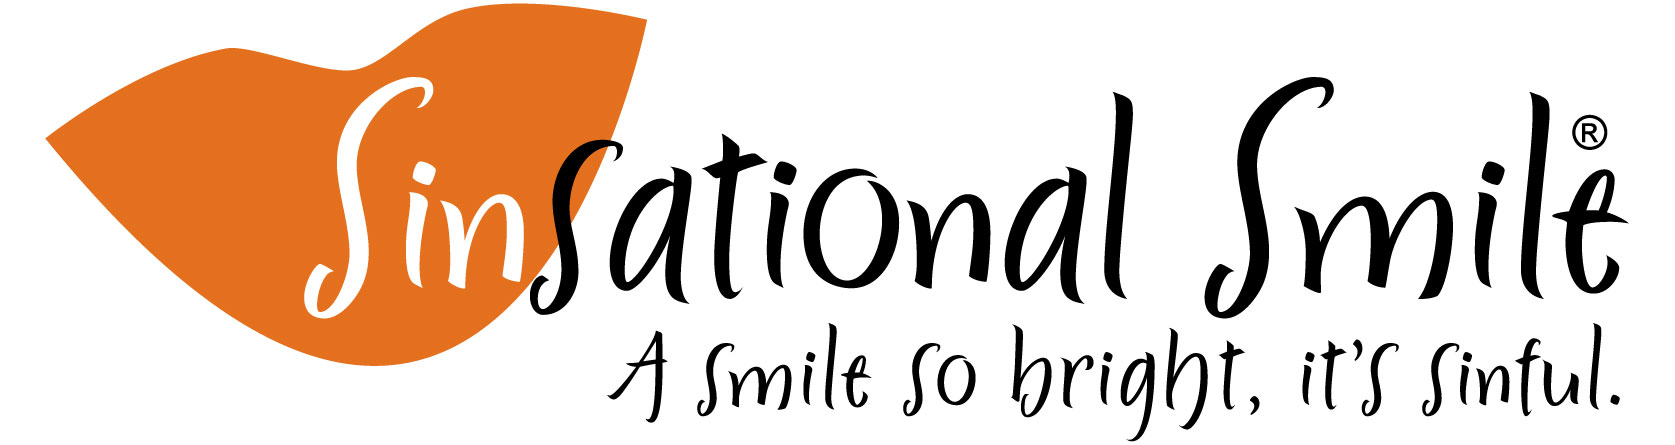 Logo for Sinsational Smile with caption 'A Smile So Bright, It's Sinful.'